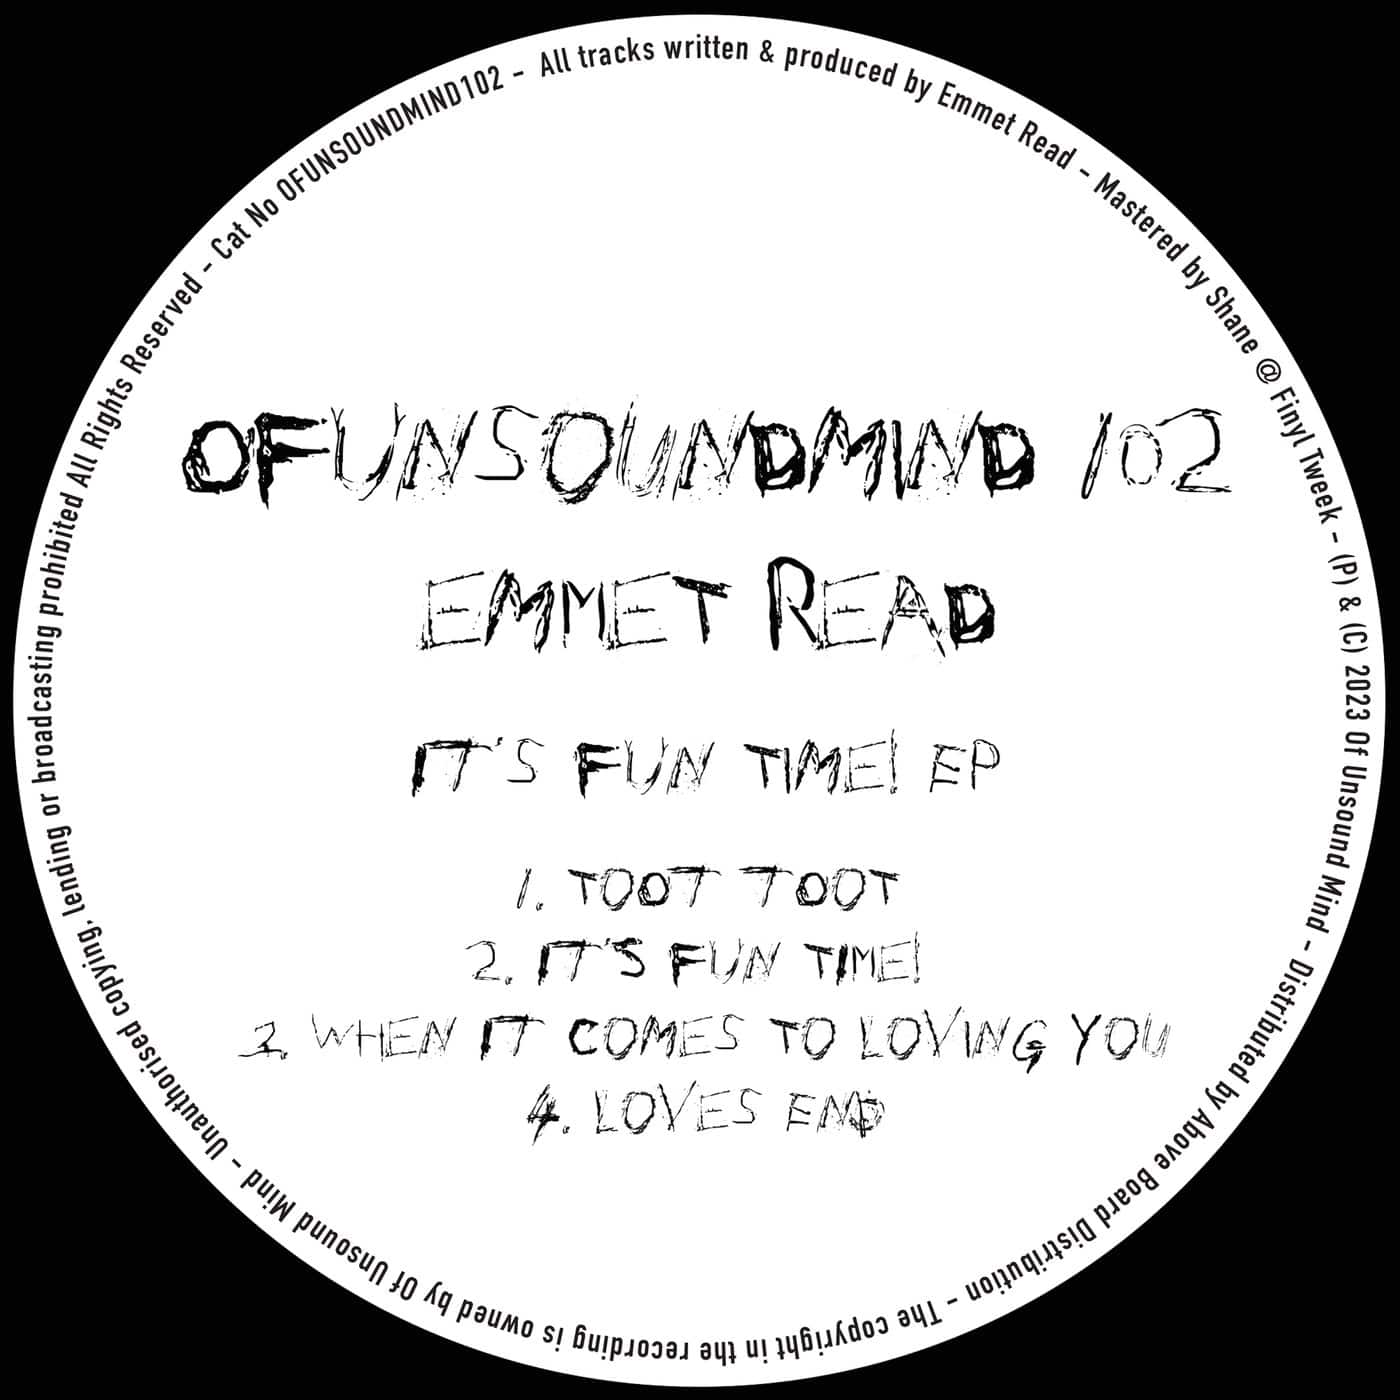 Download Emmet Read - Its Fun Time! EP on Electrobuzz